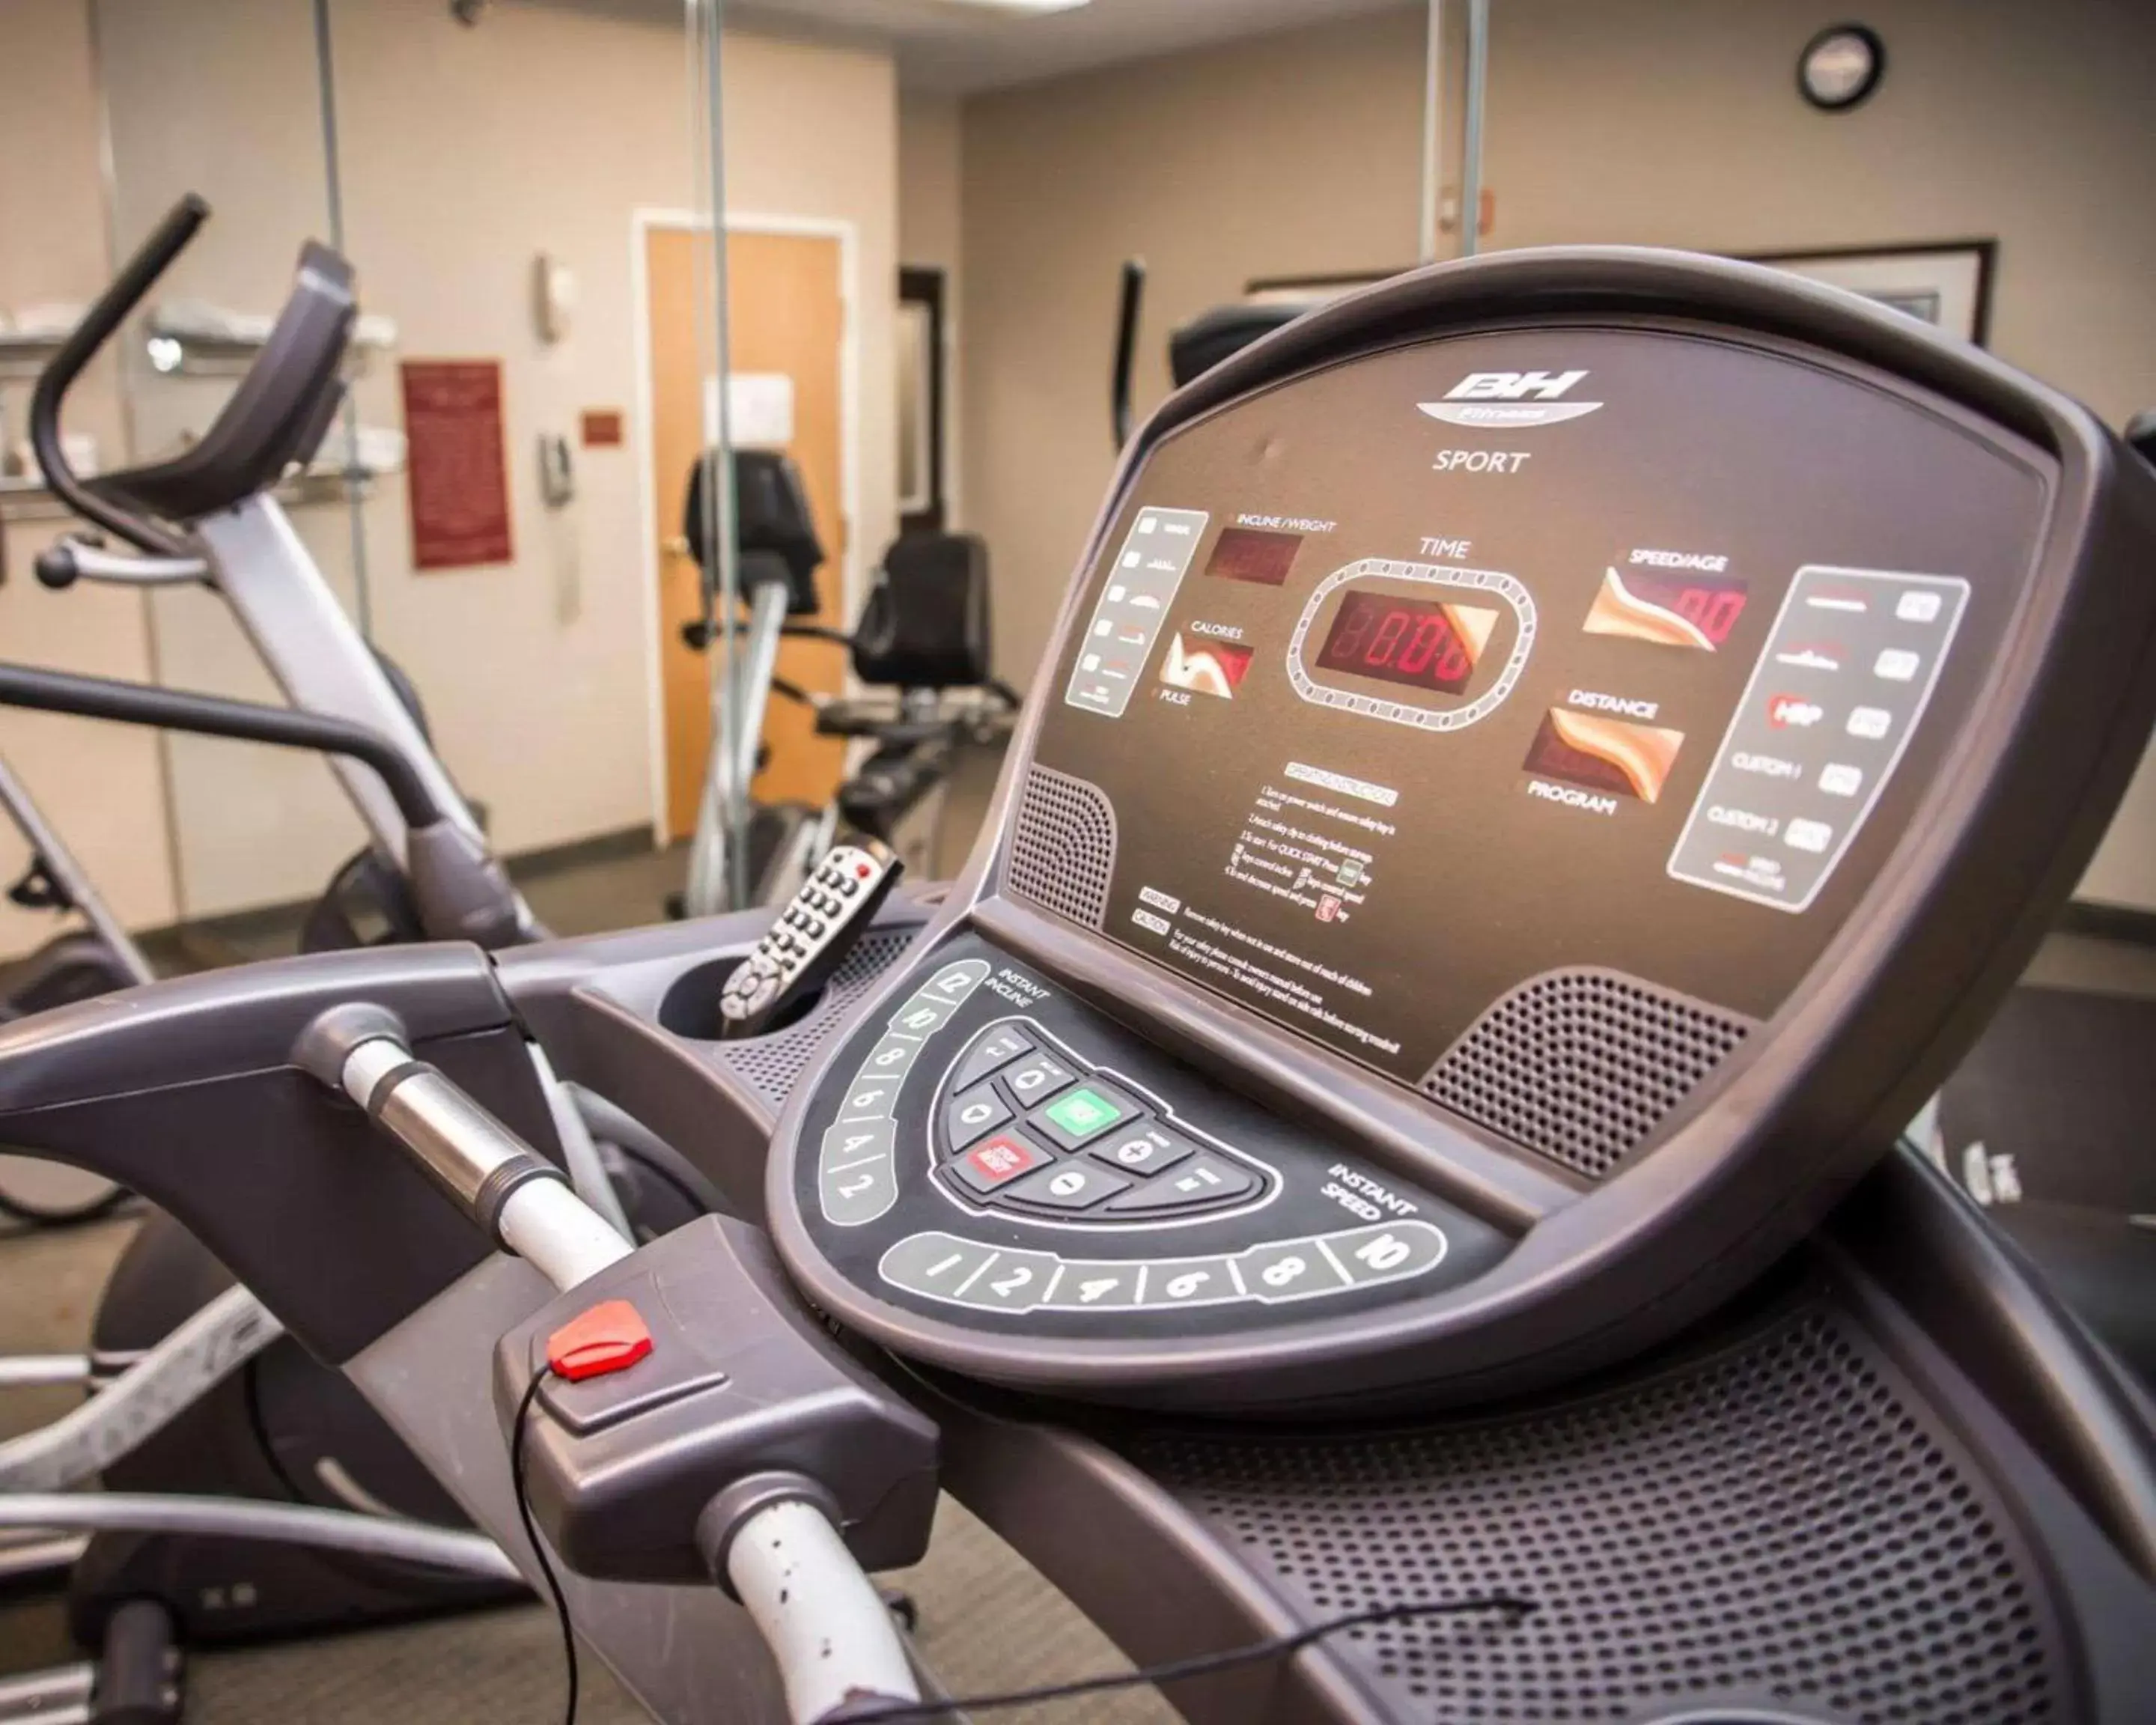 Fitness centre/facilities, Fitness Center/Facilities in Sleep Inn & Suites at Concord Mills